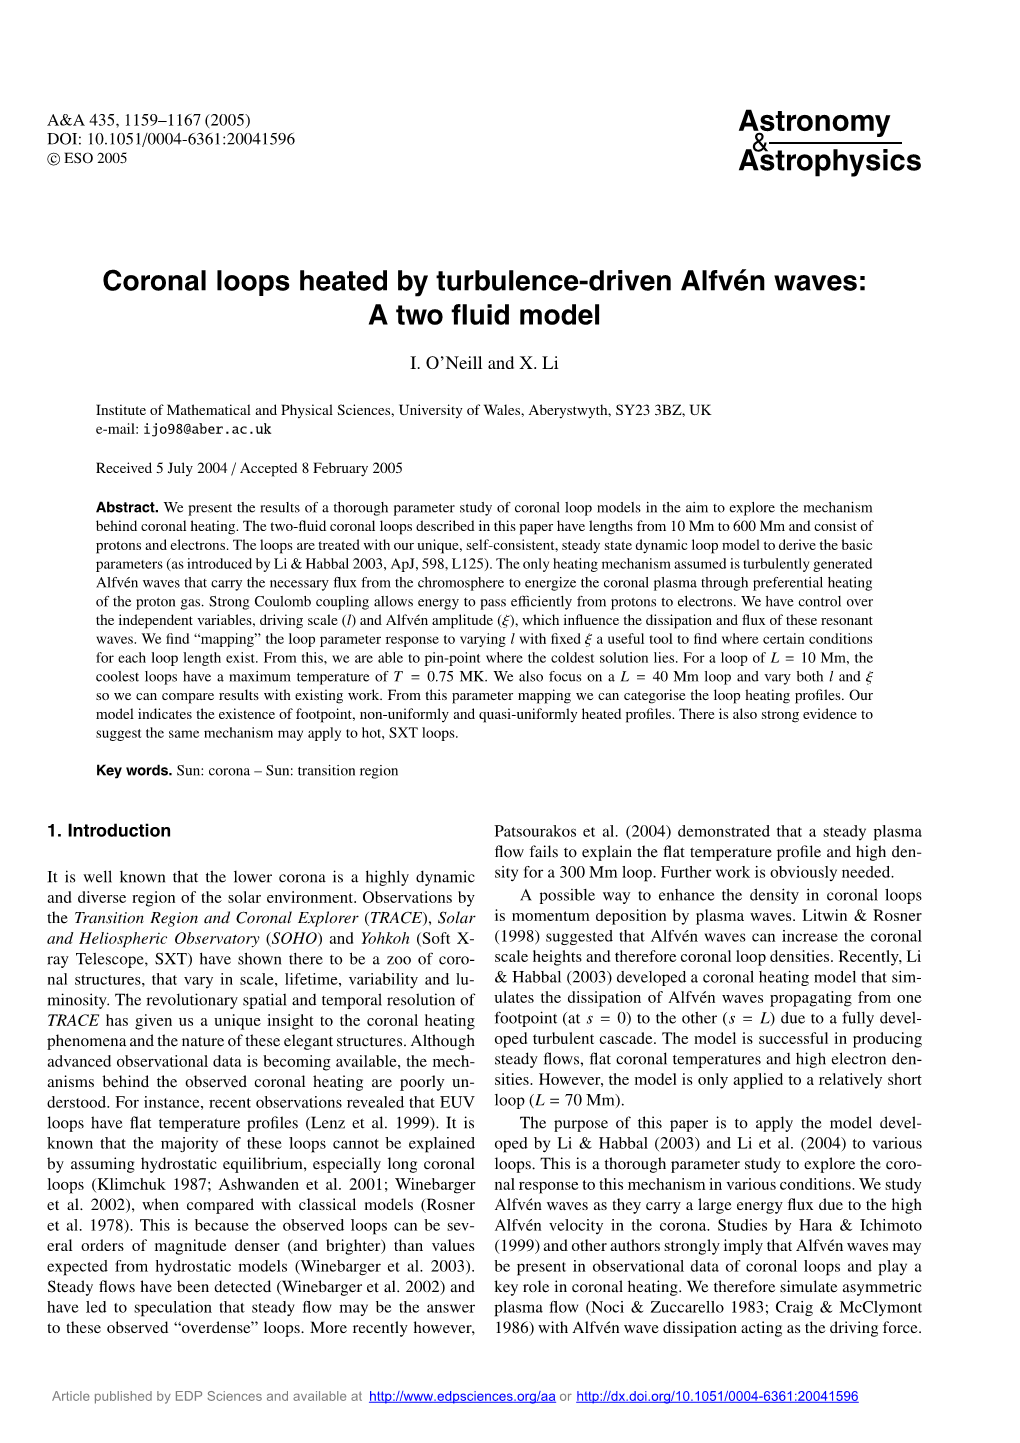 Coronal Loops Heated by Turbulence-Driven Alfvén Waves: a Two ﬂuid Model